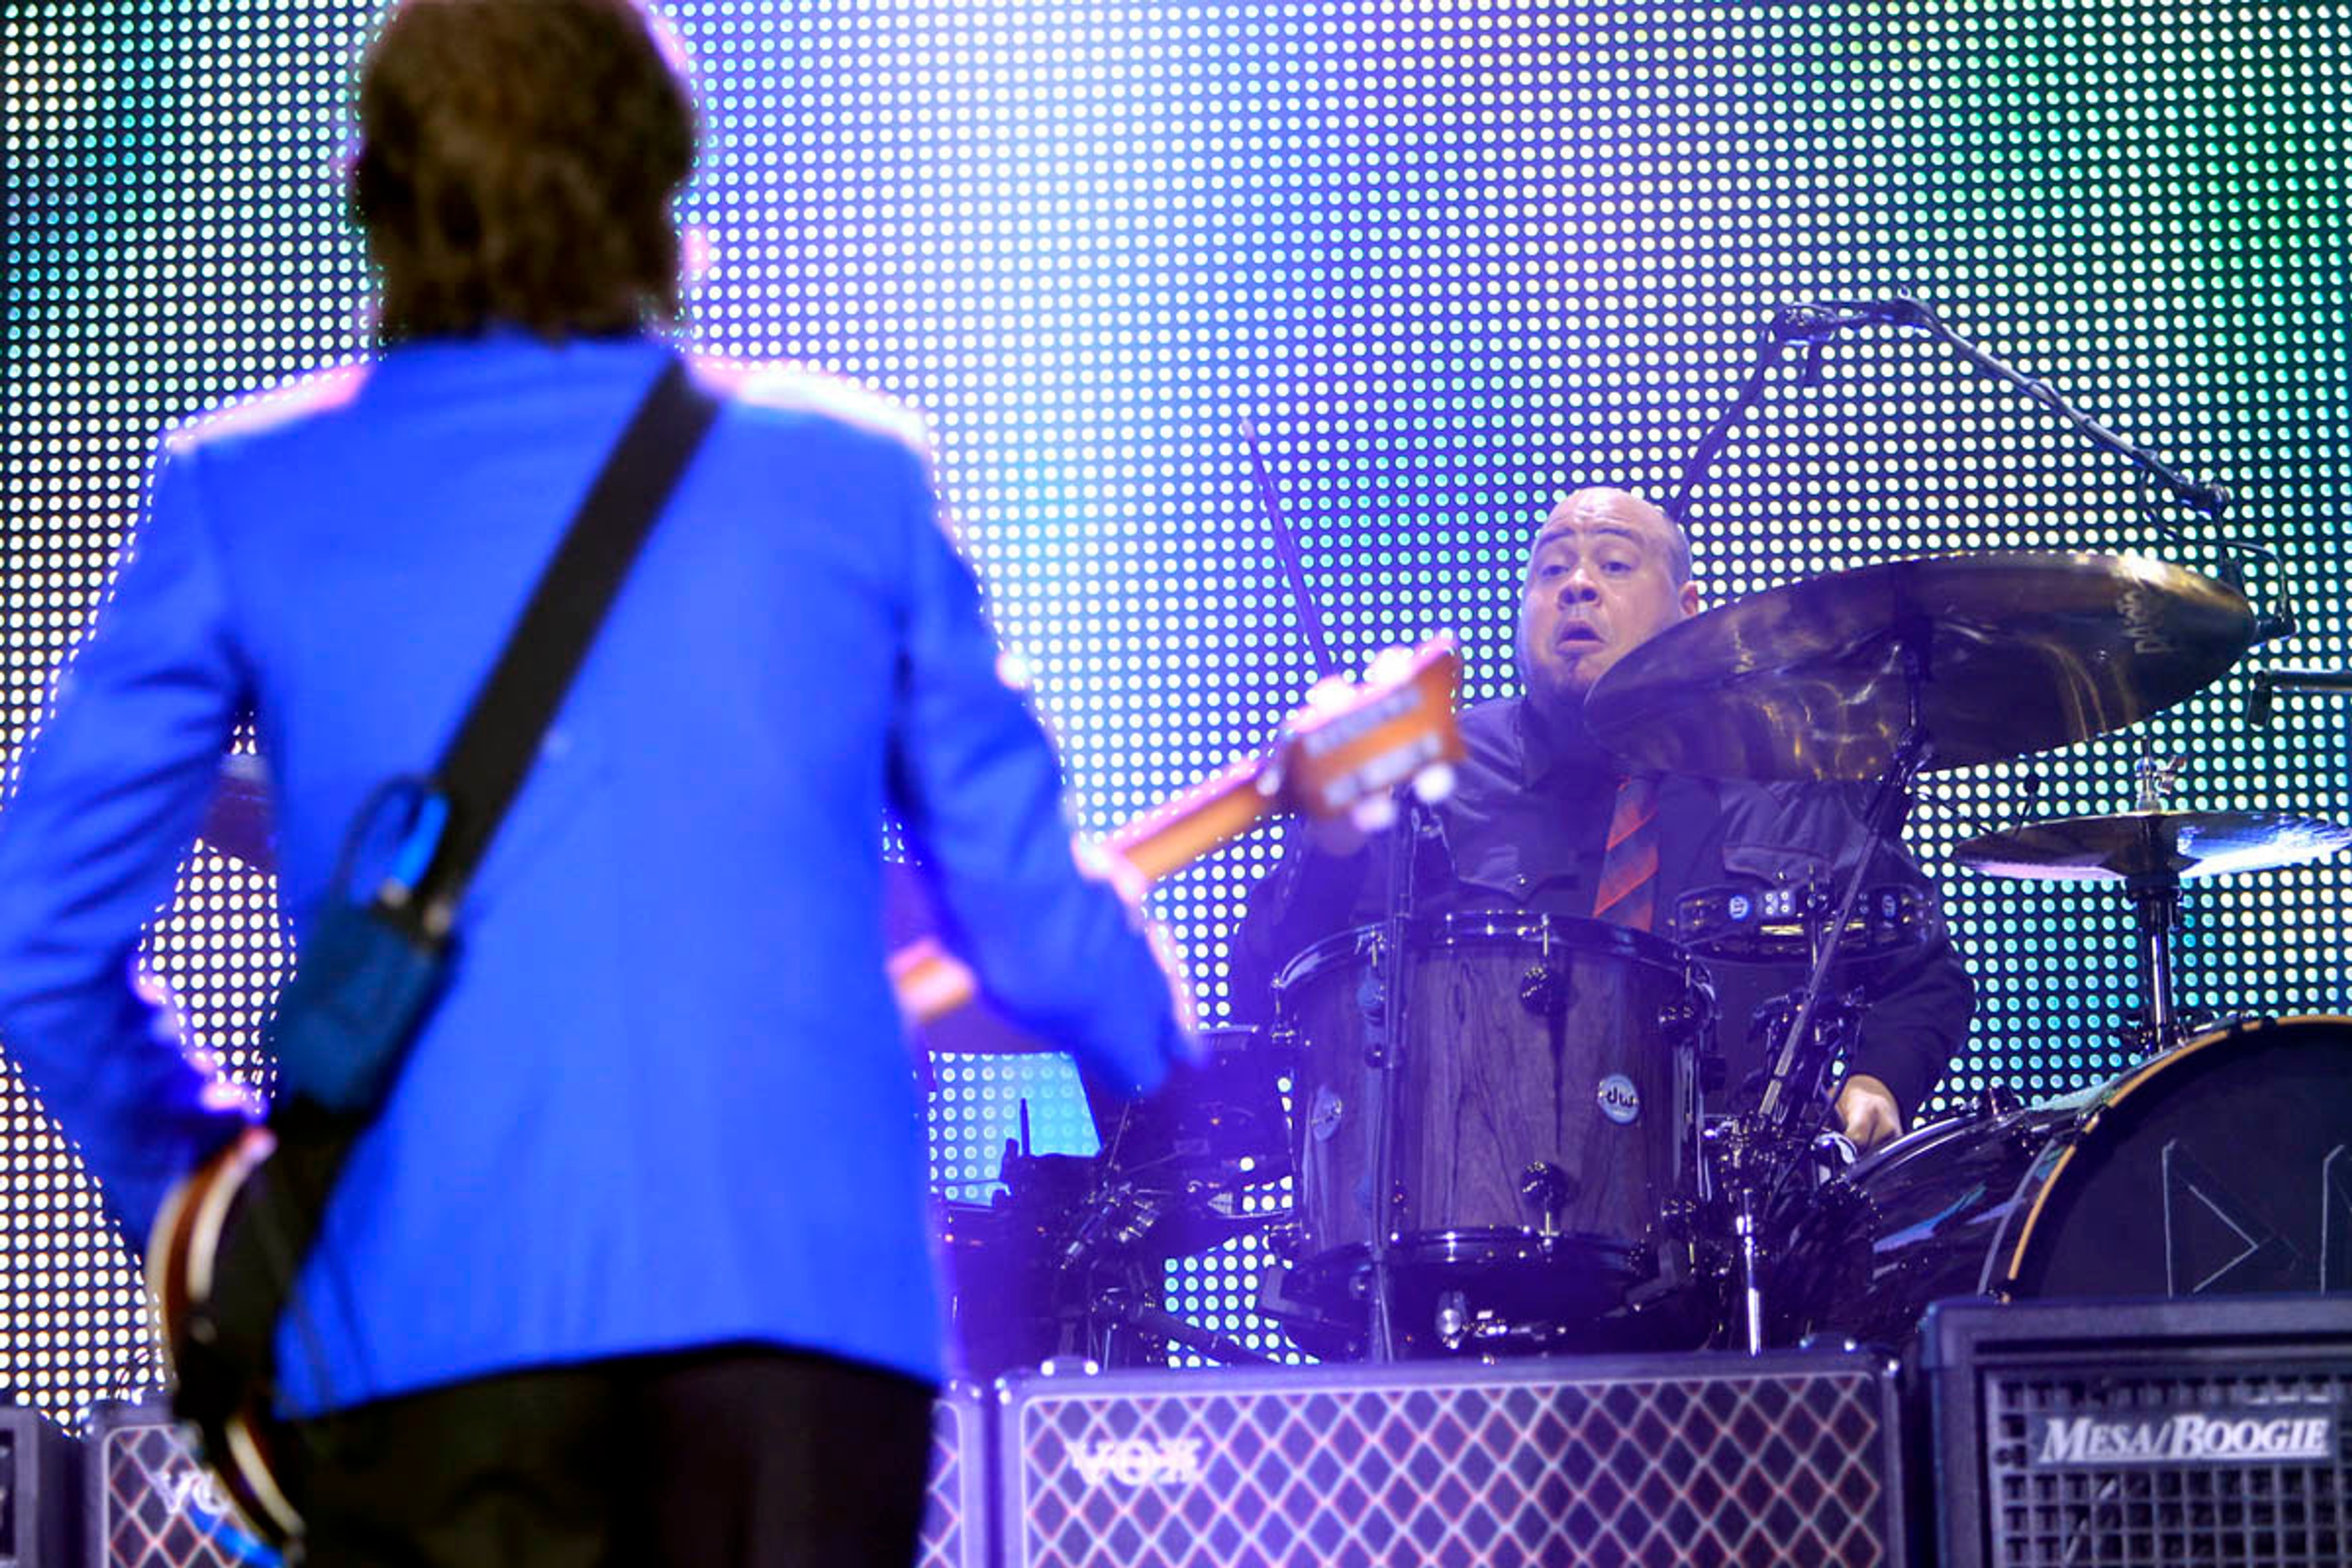 Paul and Abe on stage, Minute Maid Park, Houston, 14th November 2012